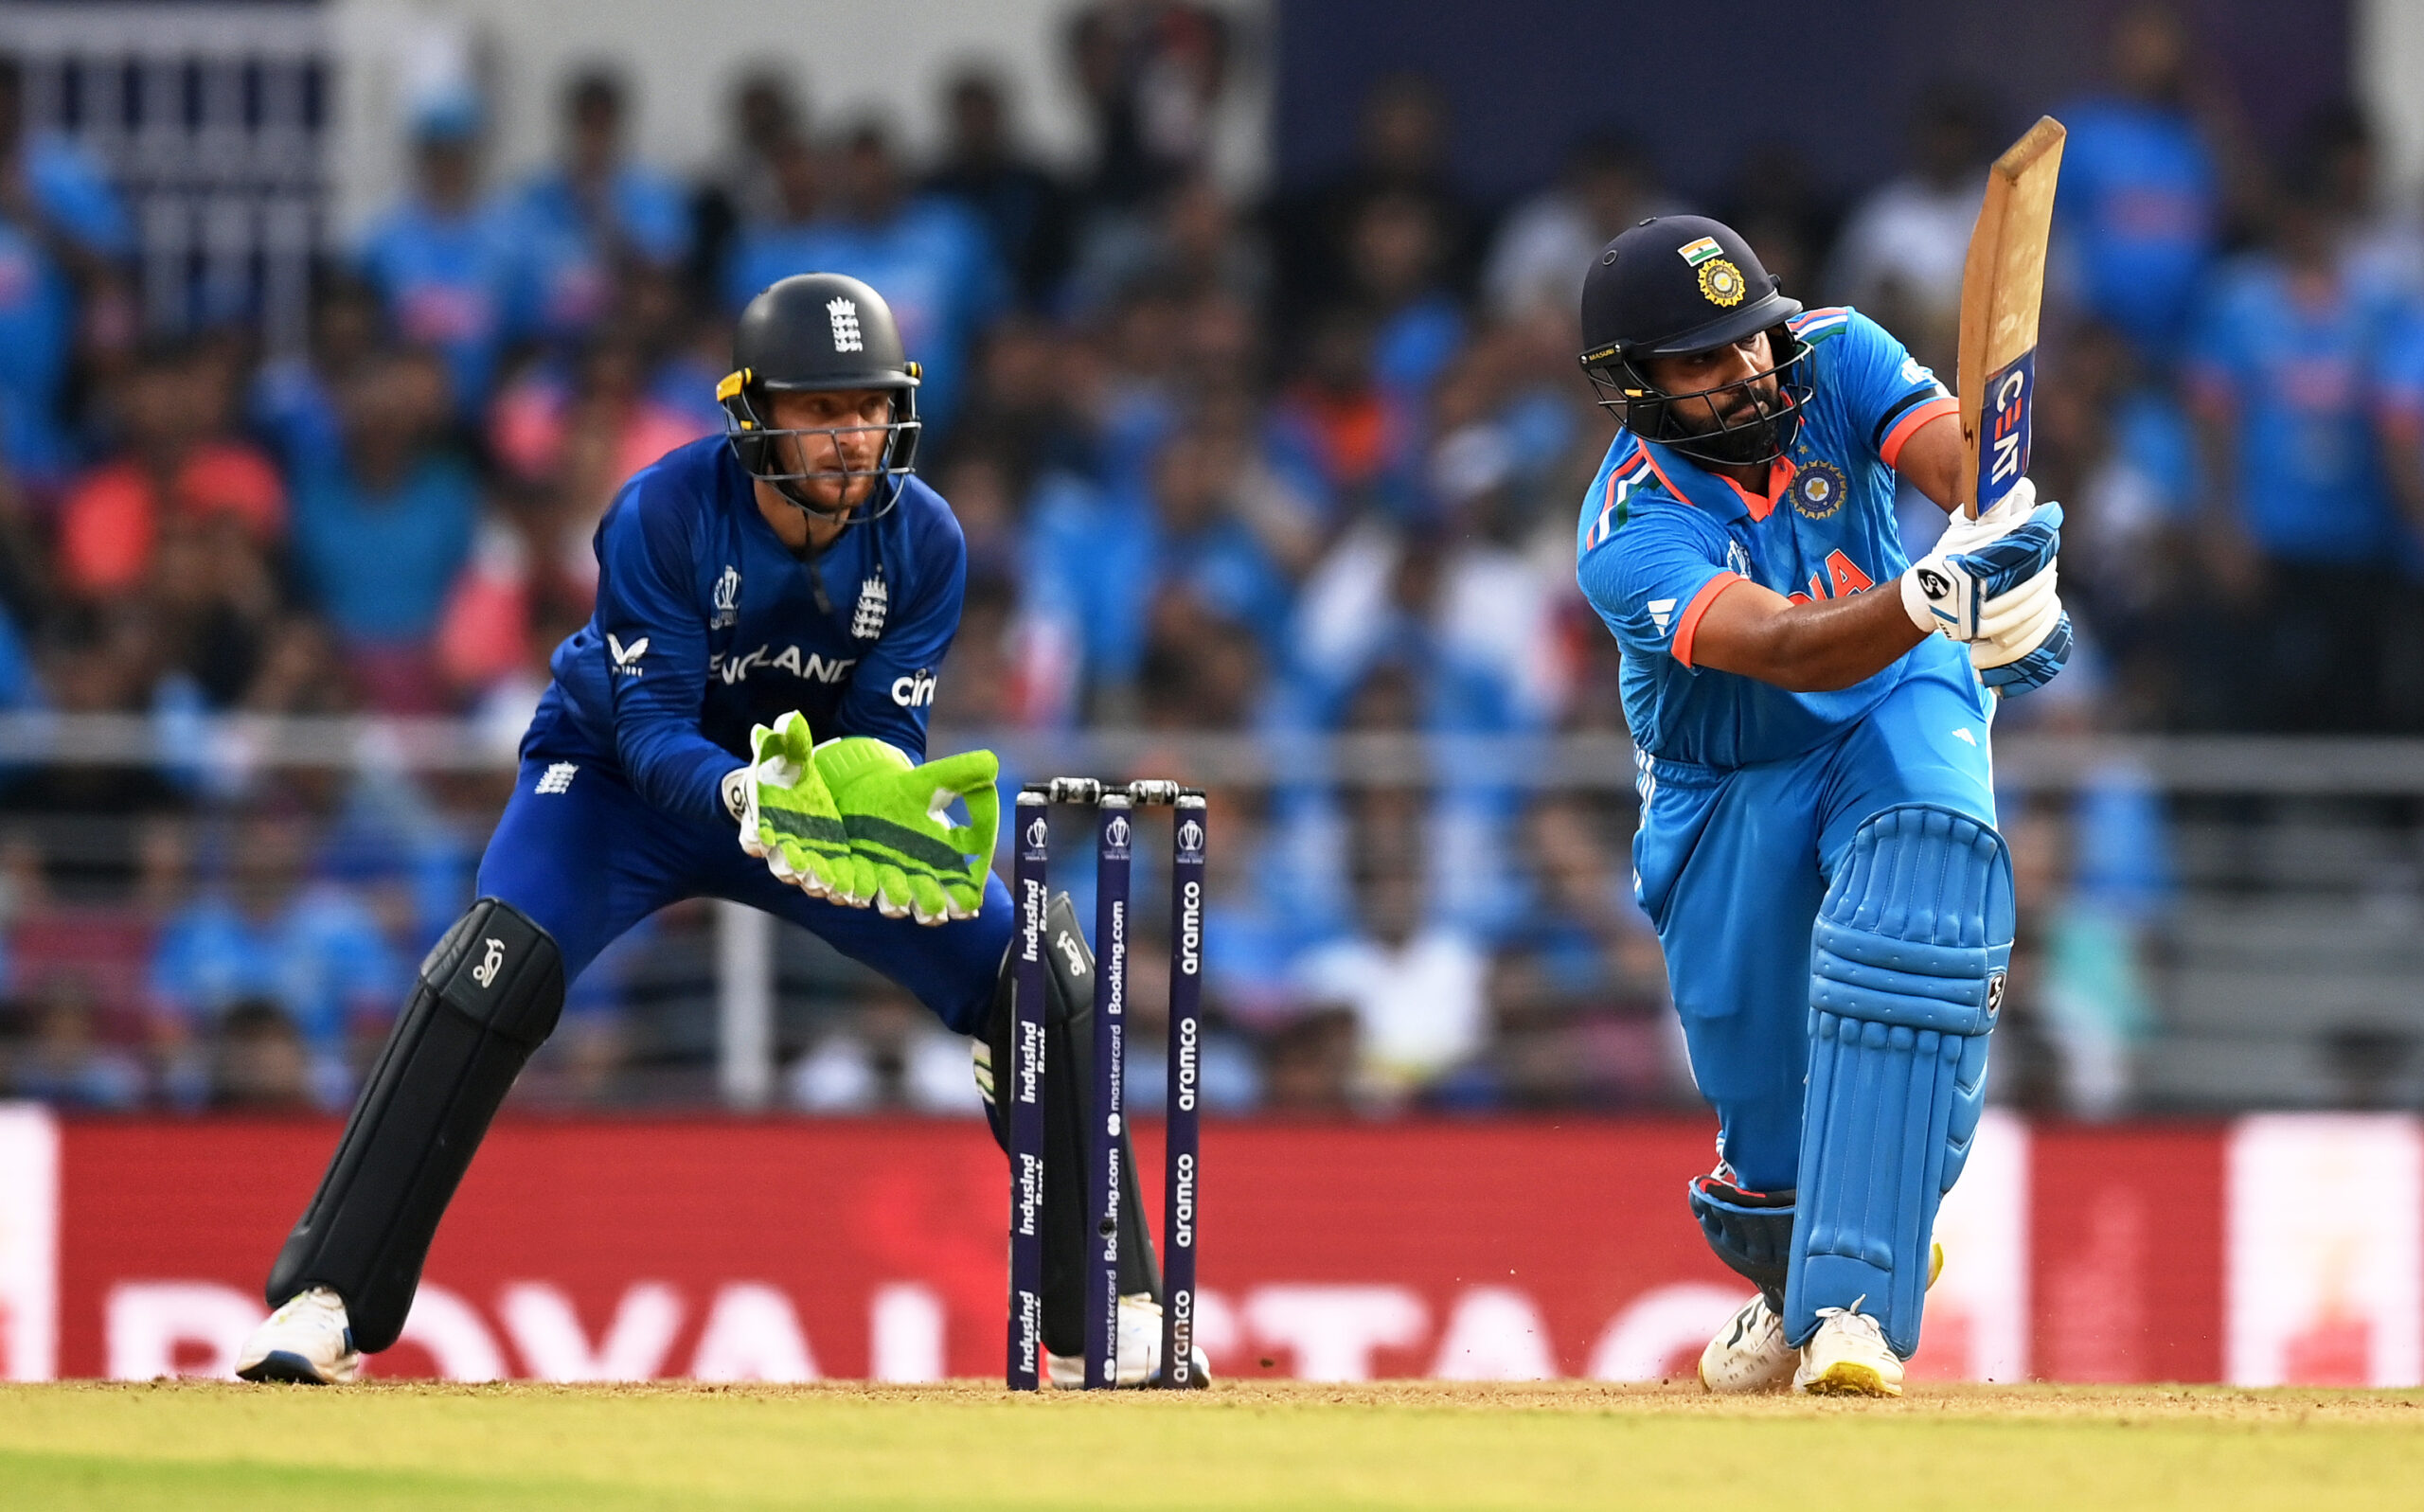 World Cup: Rohit hits 87 as India huff and puff to 229 vs England